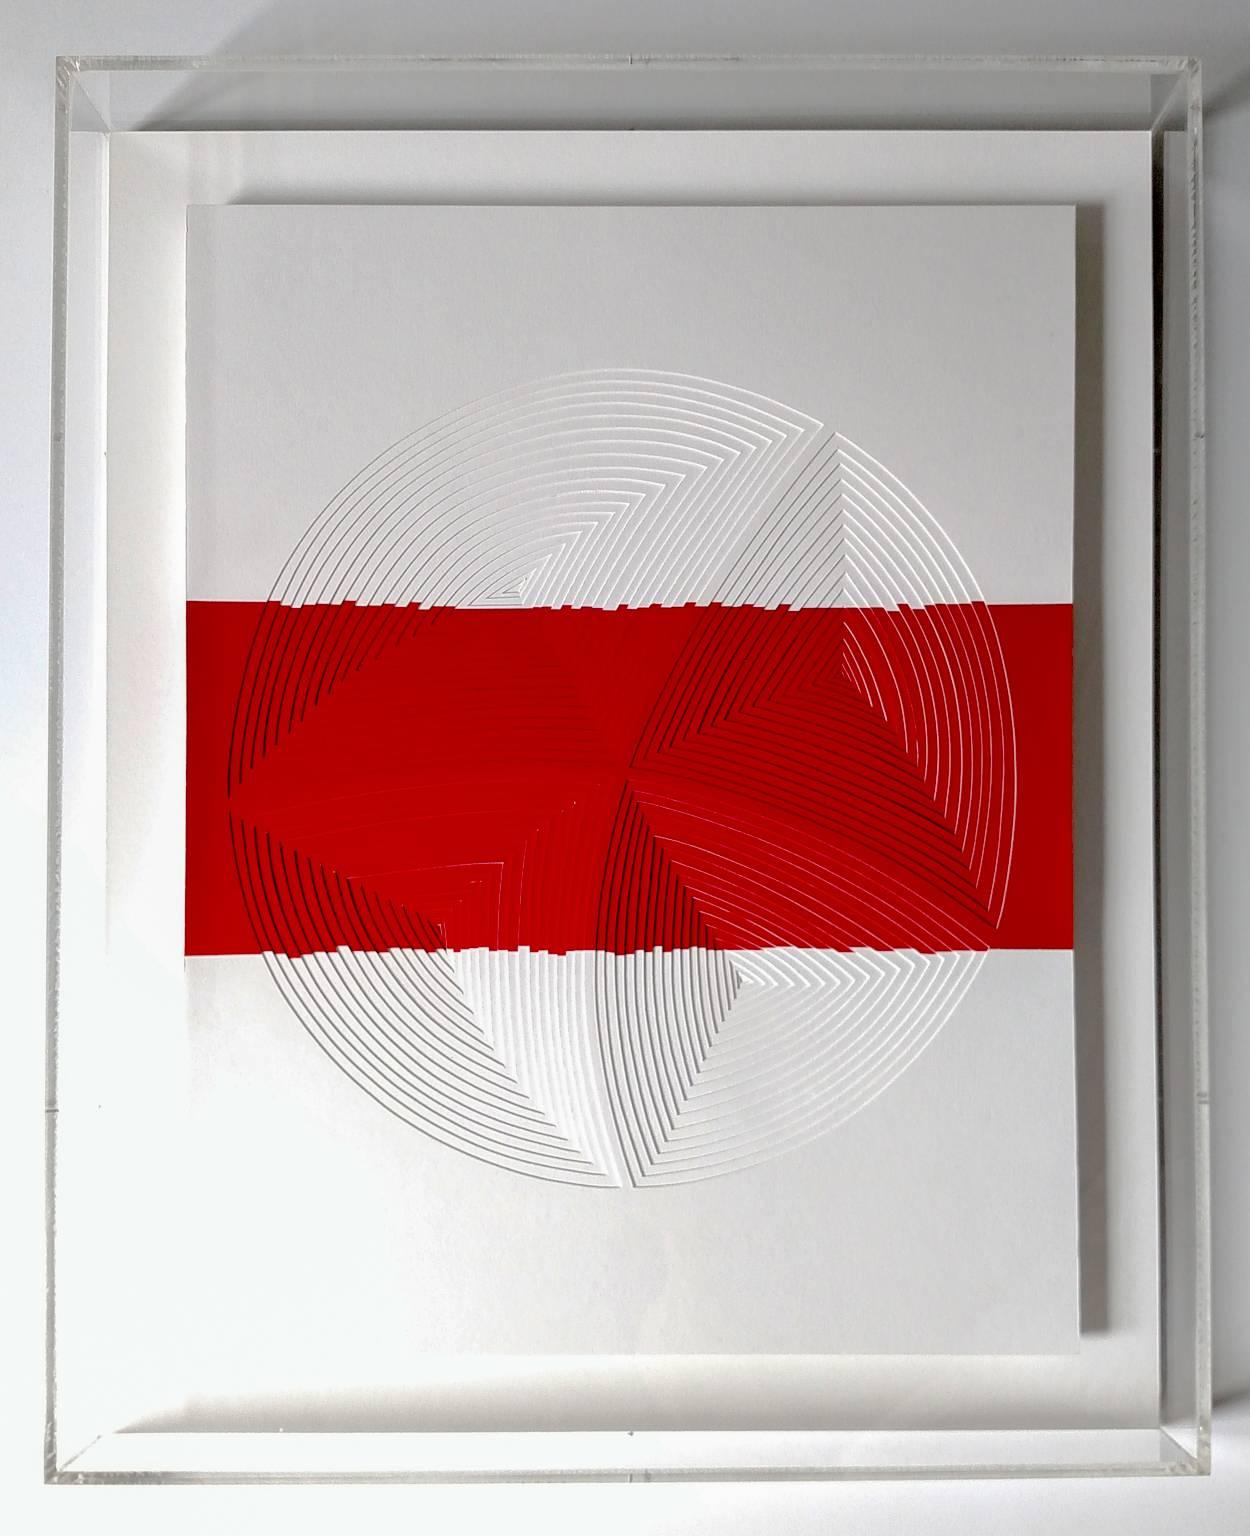 Cut w/ Surgical Scalpel on 2 ply Museum Board: 'Red & White Stripe Circle-In'